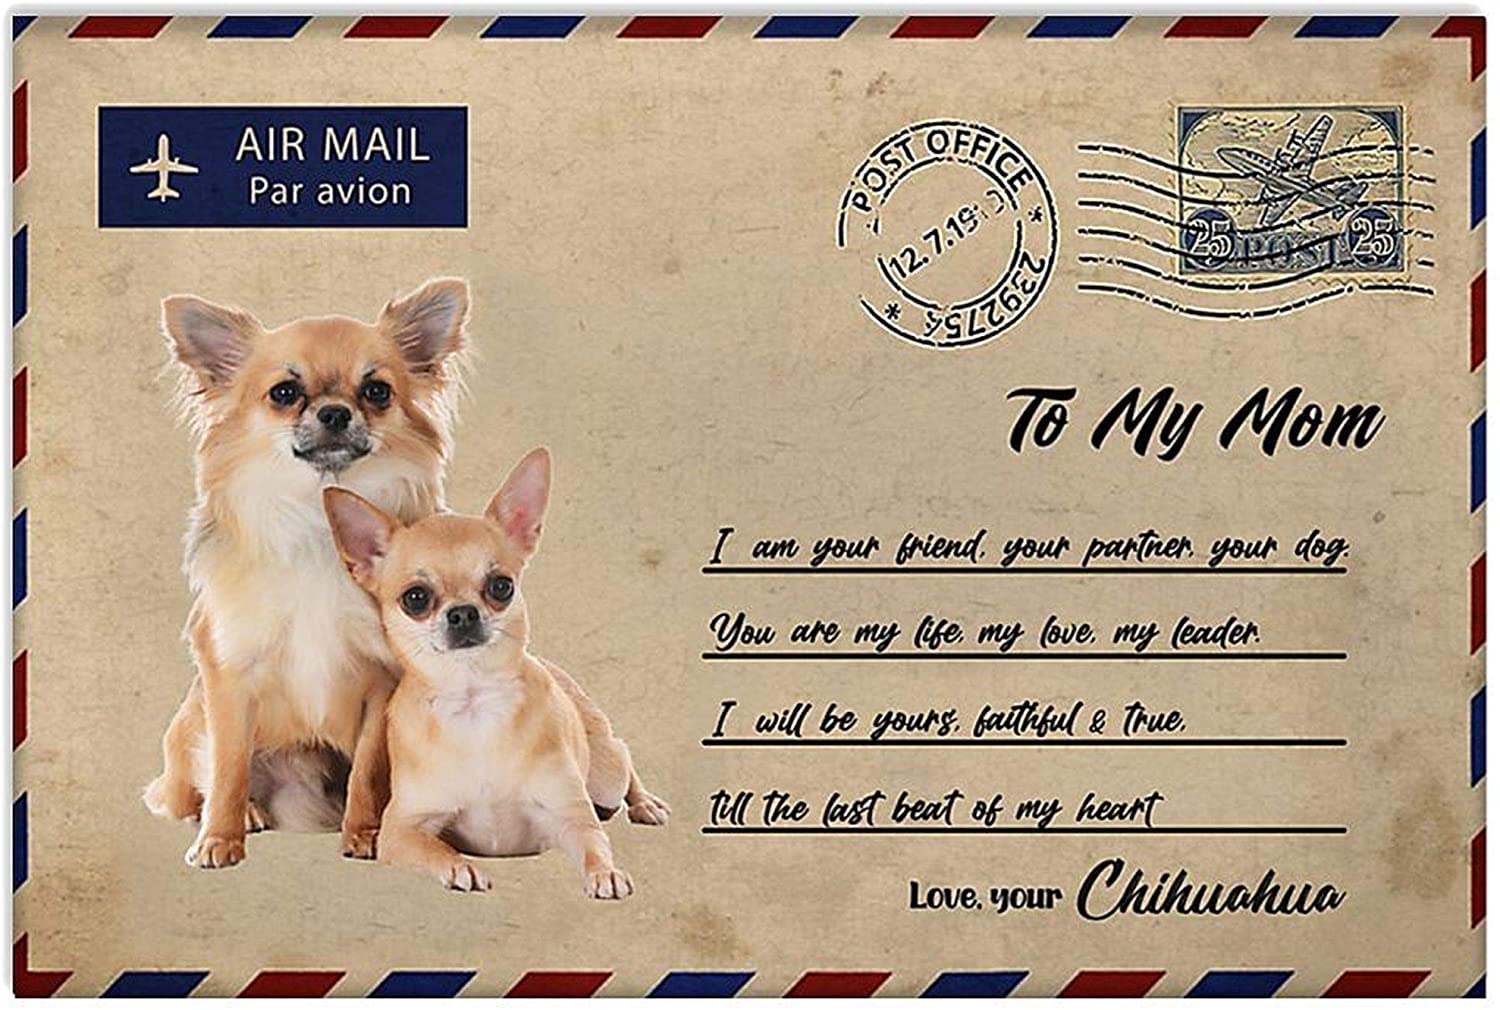 ANDIEZ Chihuahua Letter to My Mom Poster